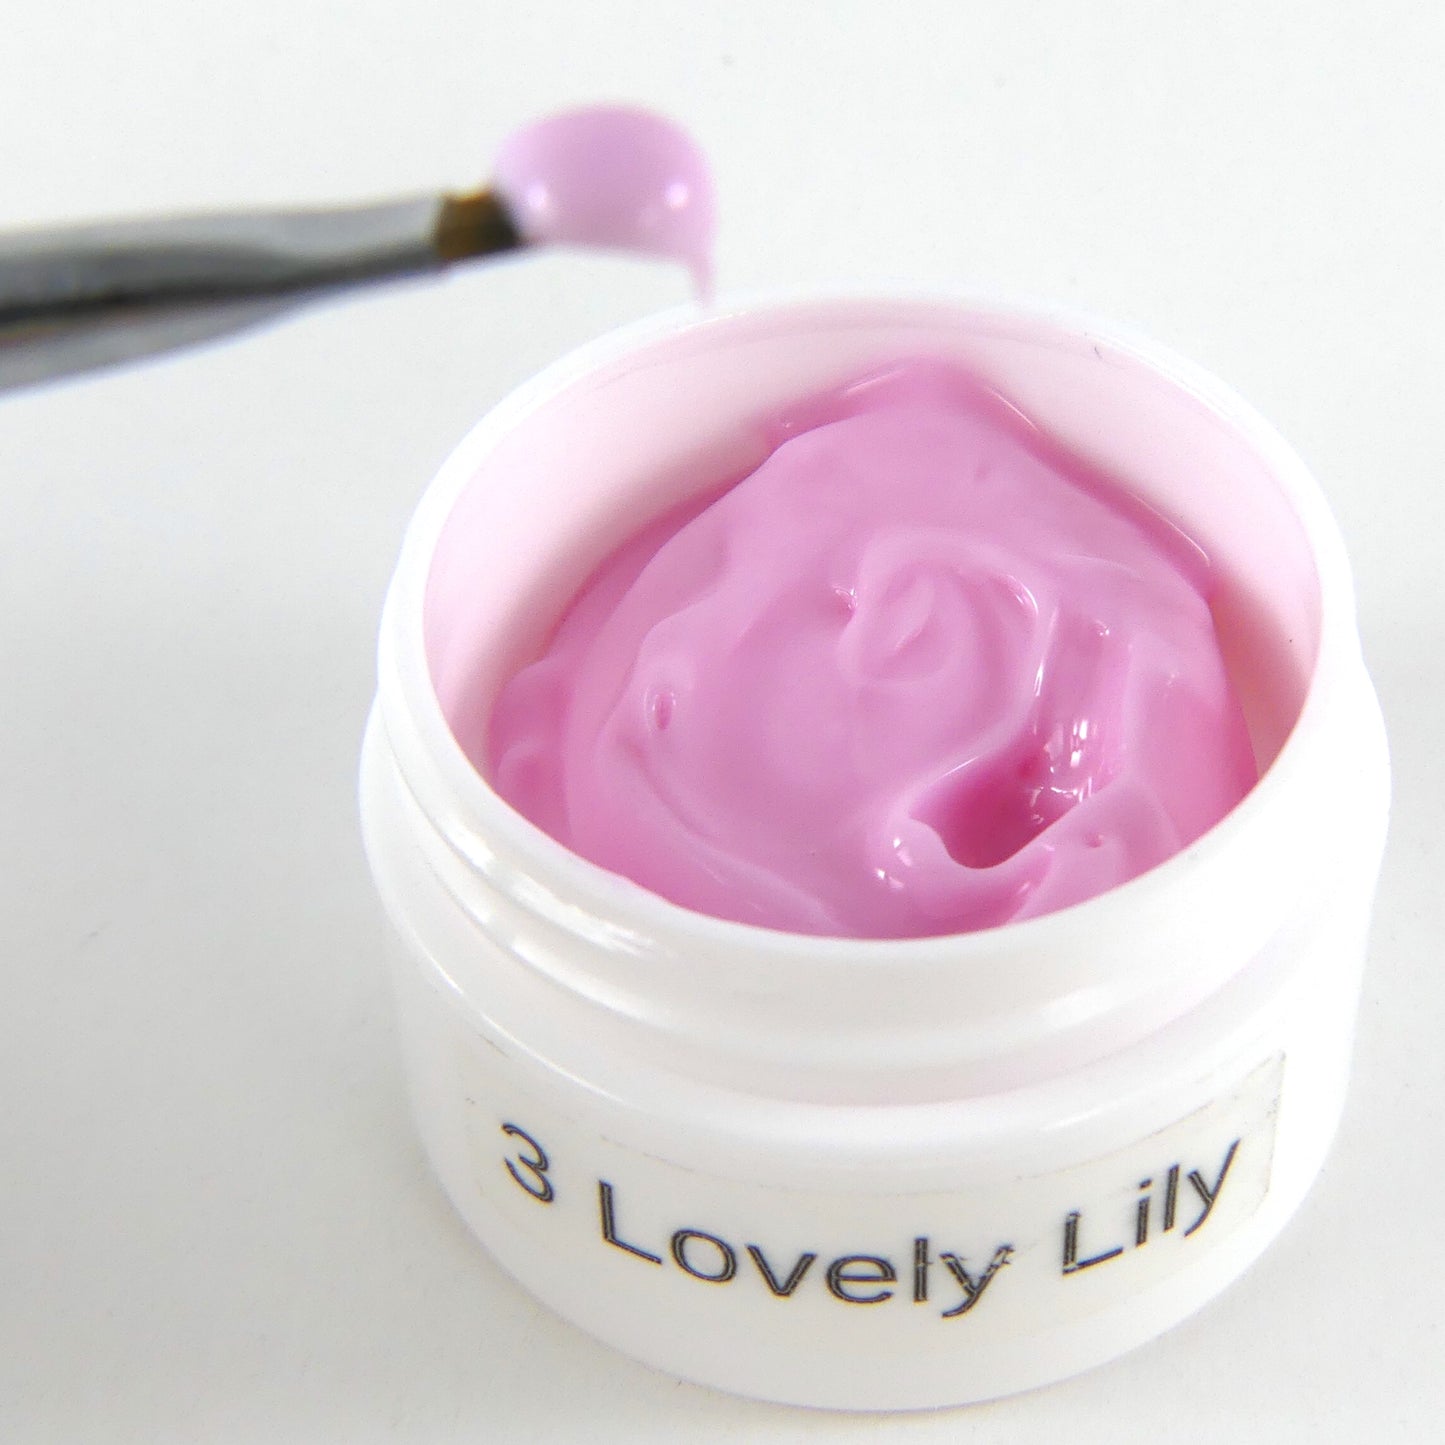 Load image into Gallery viewer, Builder Gel (Lovely Lily #3) 1/2 oz - My Little Nail Art Shop
